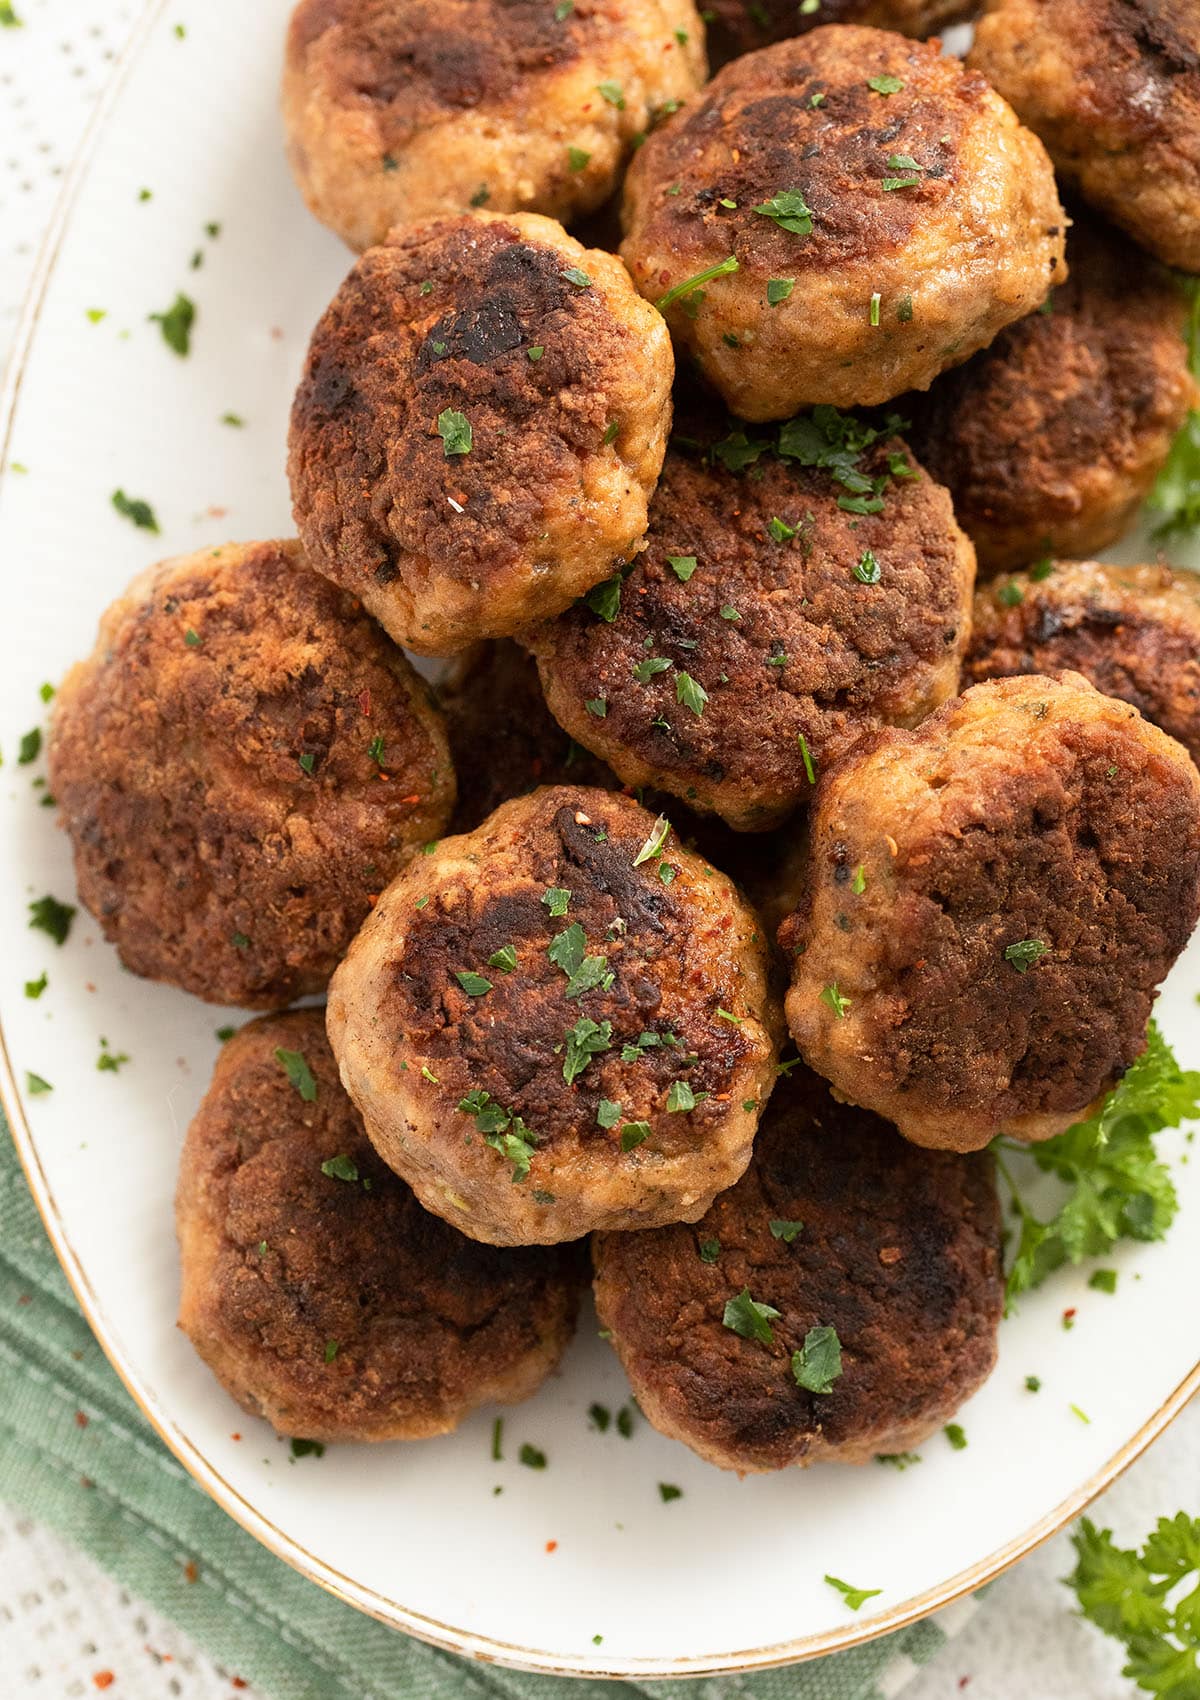 many meatballs with ground veal and parsley on a white platter.